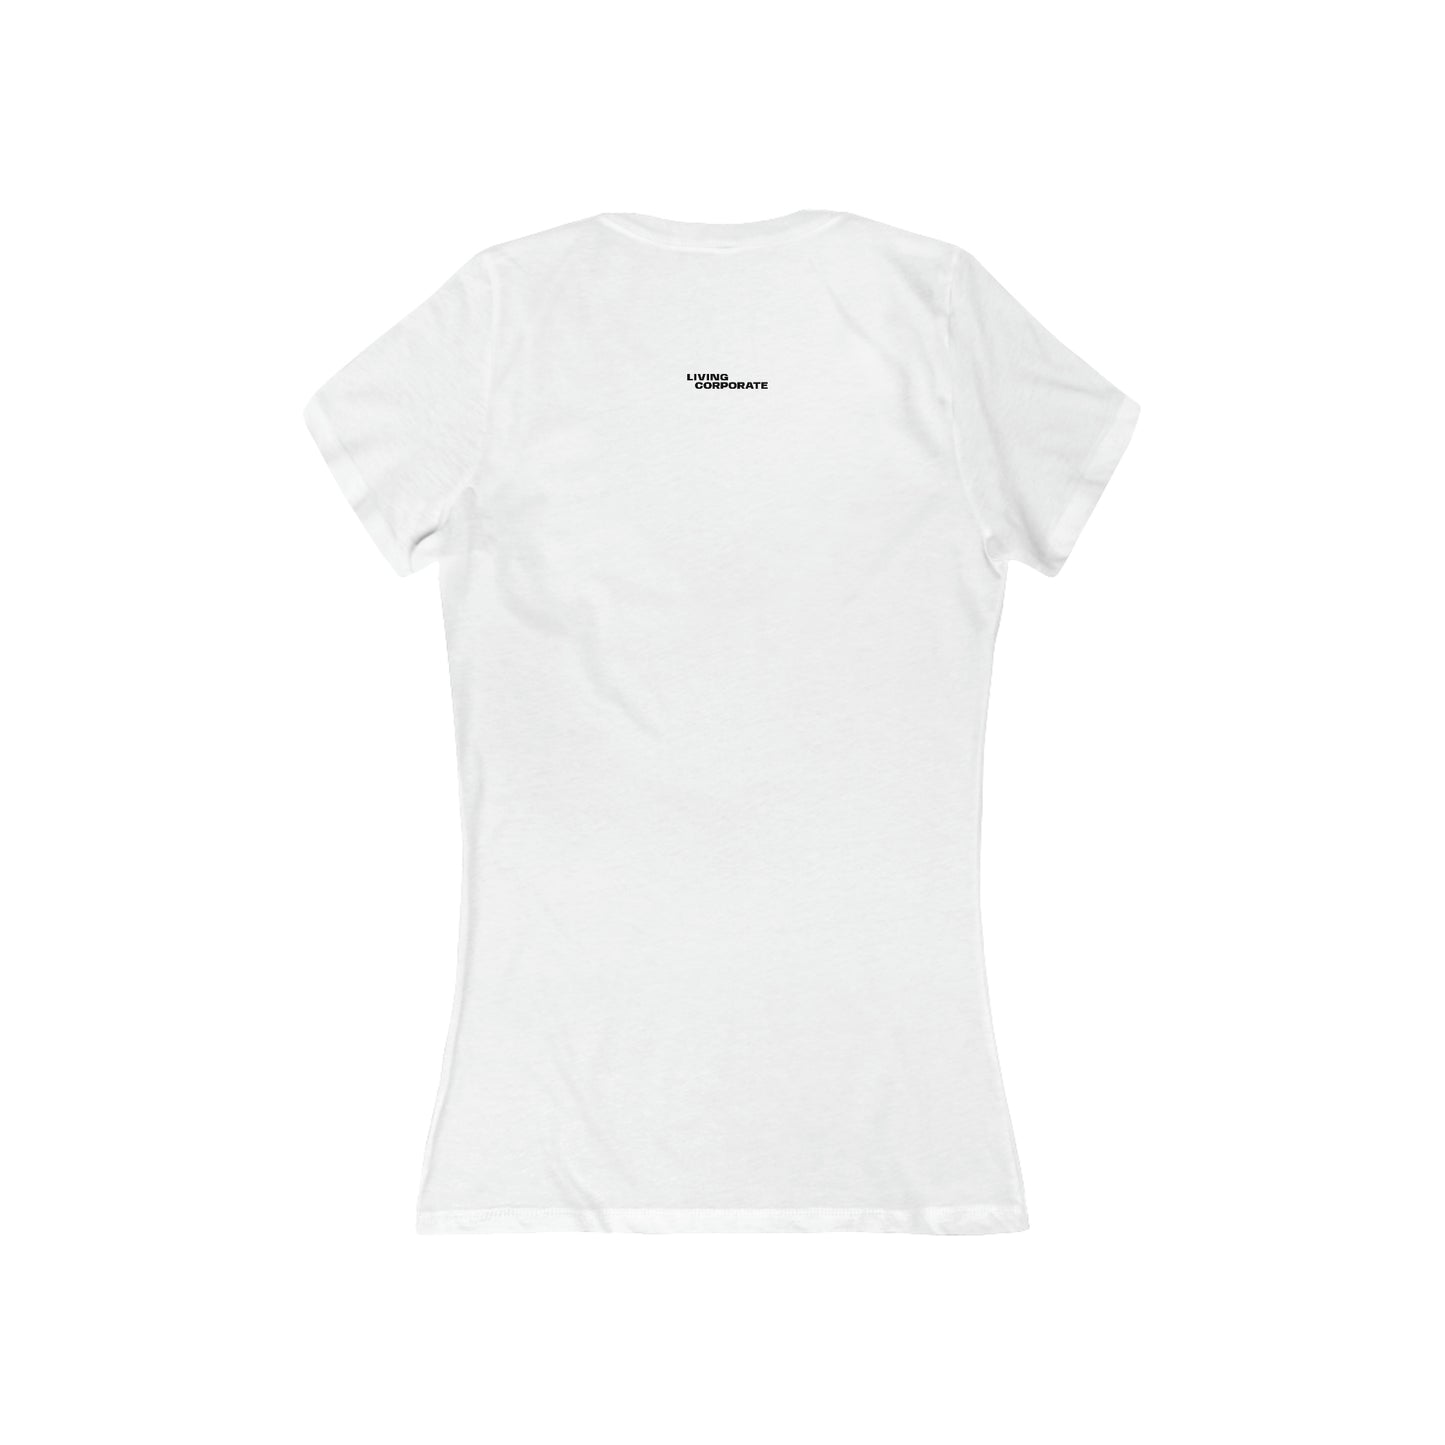 Purpose Over Paycheck | Women's V-Neck Tee